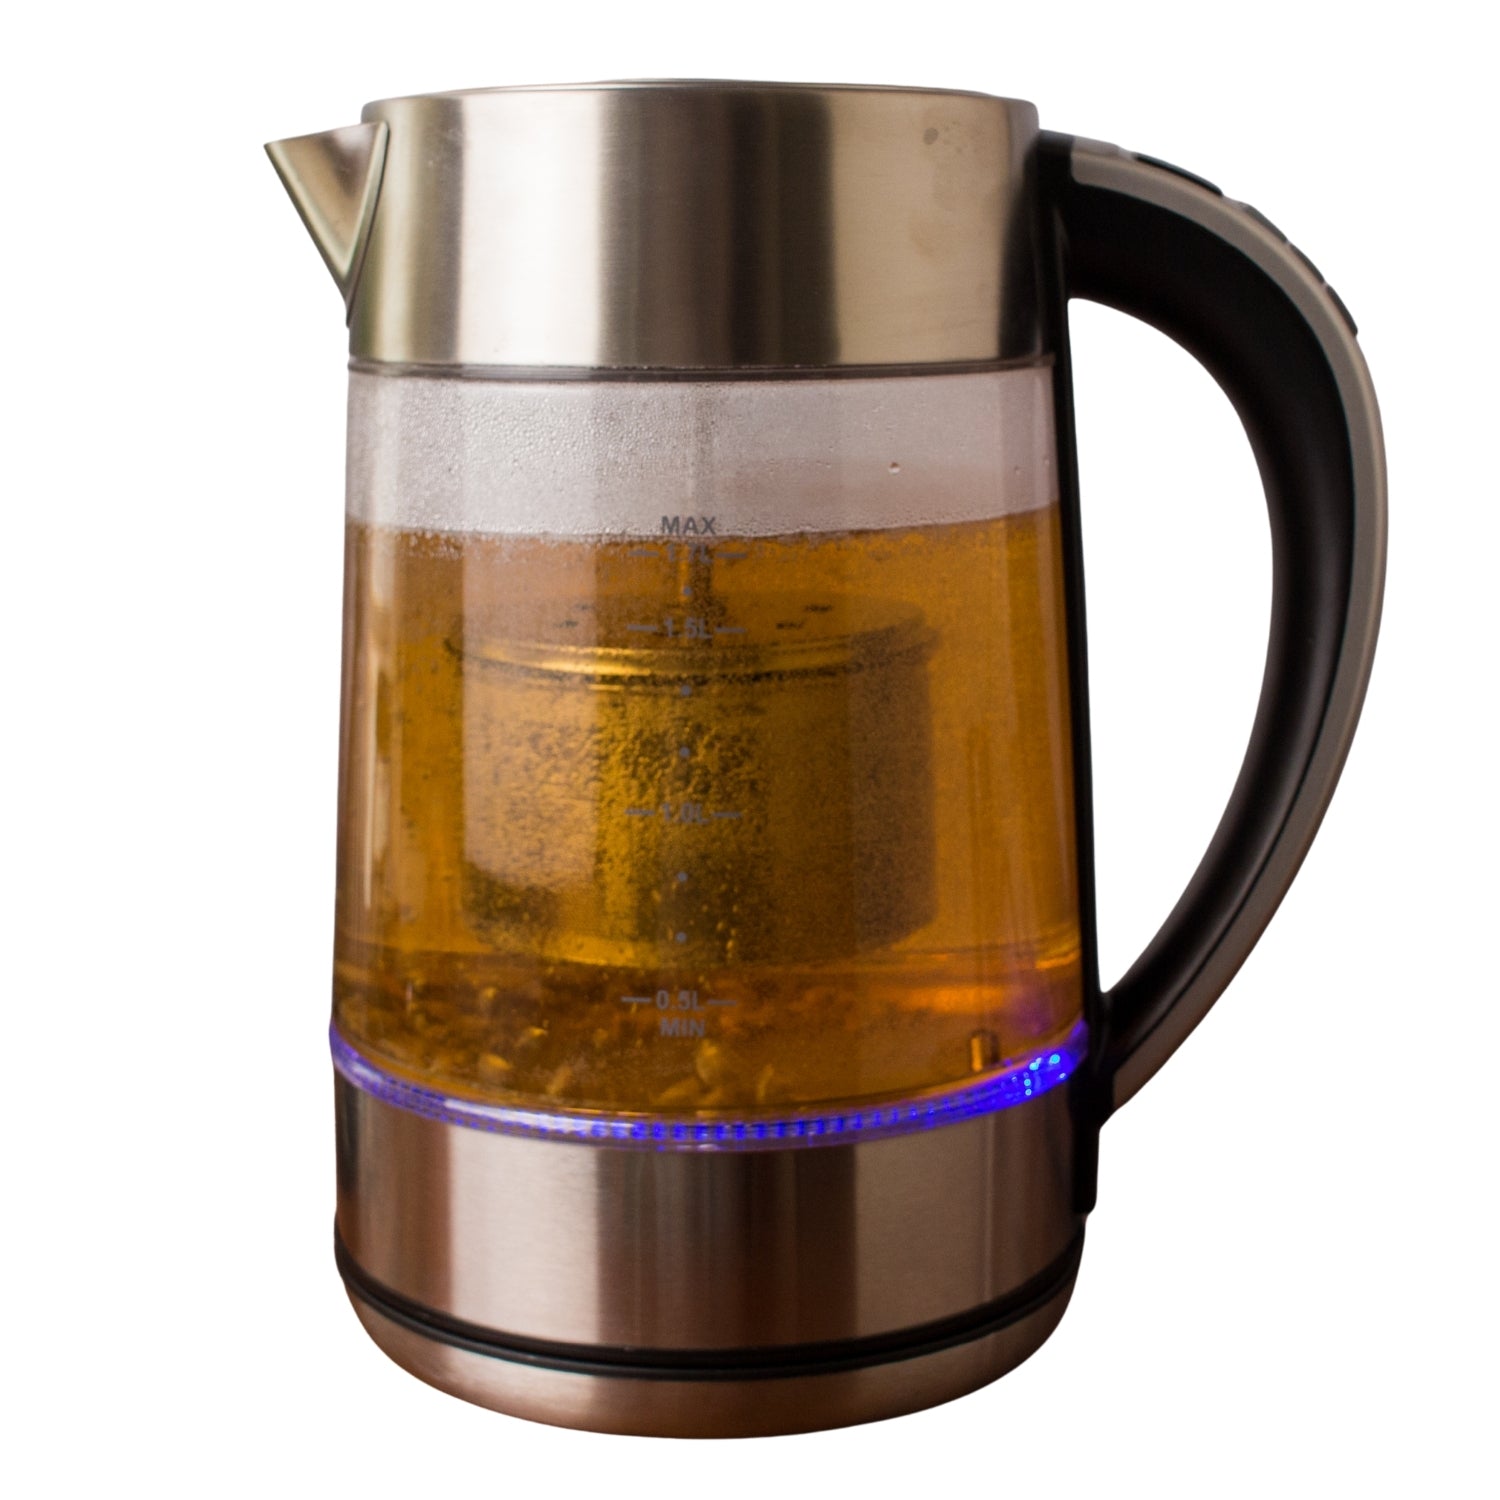 InstaCuppa Electric Kettle Dispenser with Temperature Control